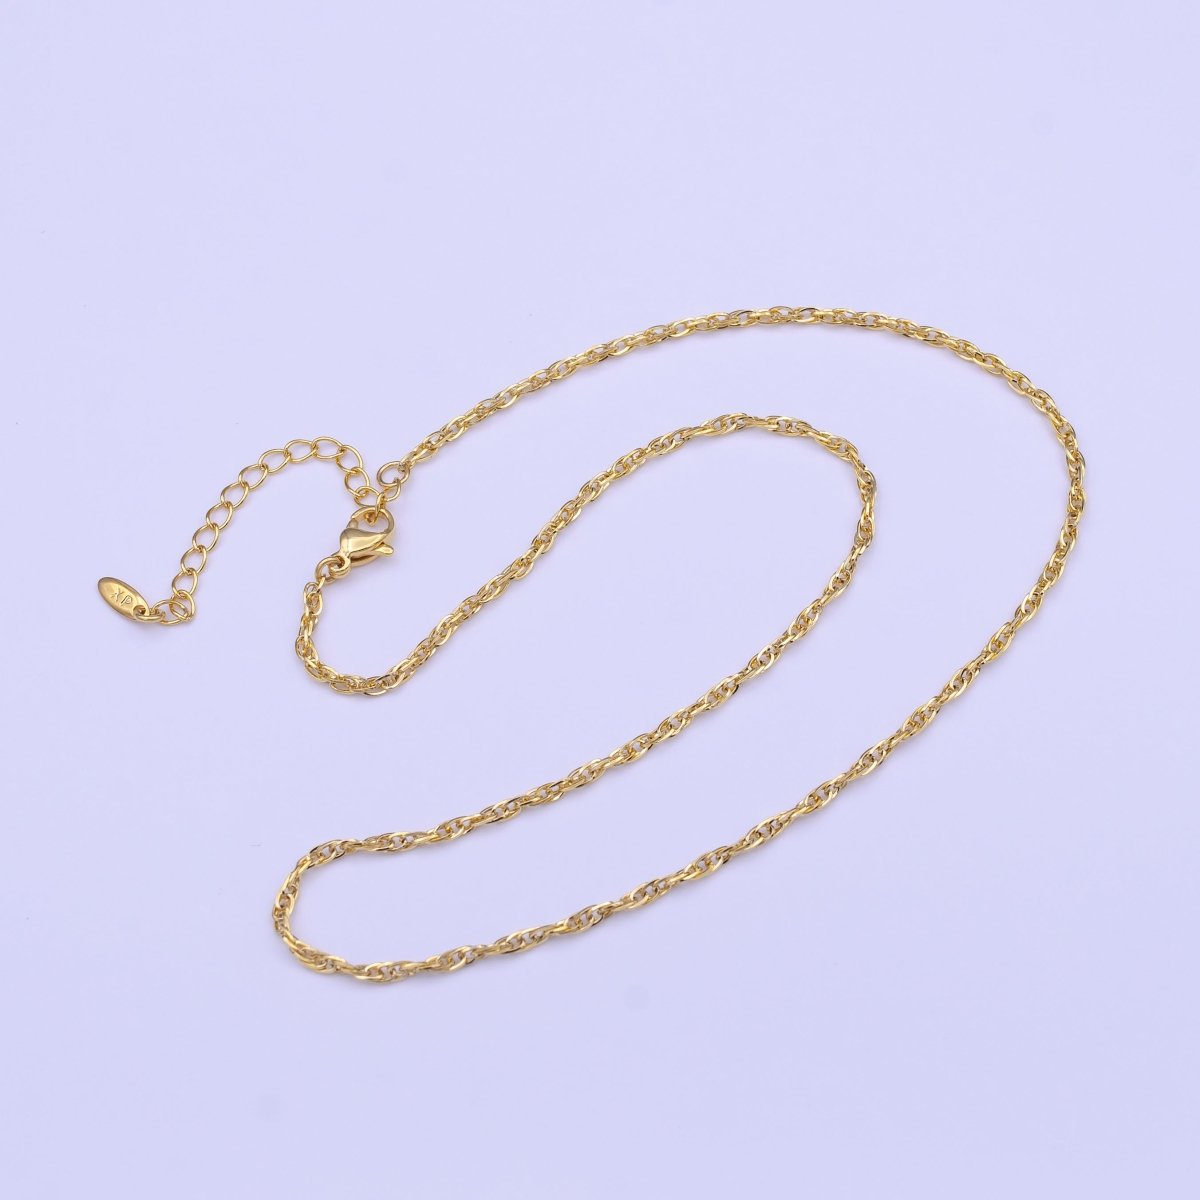 24K Gold Filled Dainty 2mm Espiga Link Connecting 16.25 Inch Chain Necklace | WA-1453 Clearance Pricing - DLUXCA